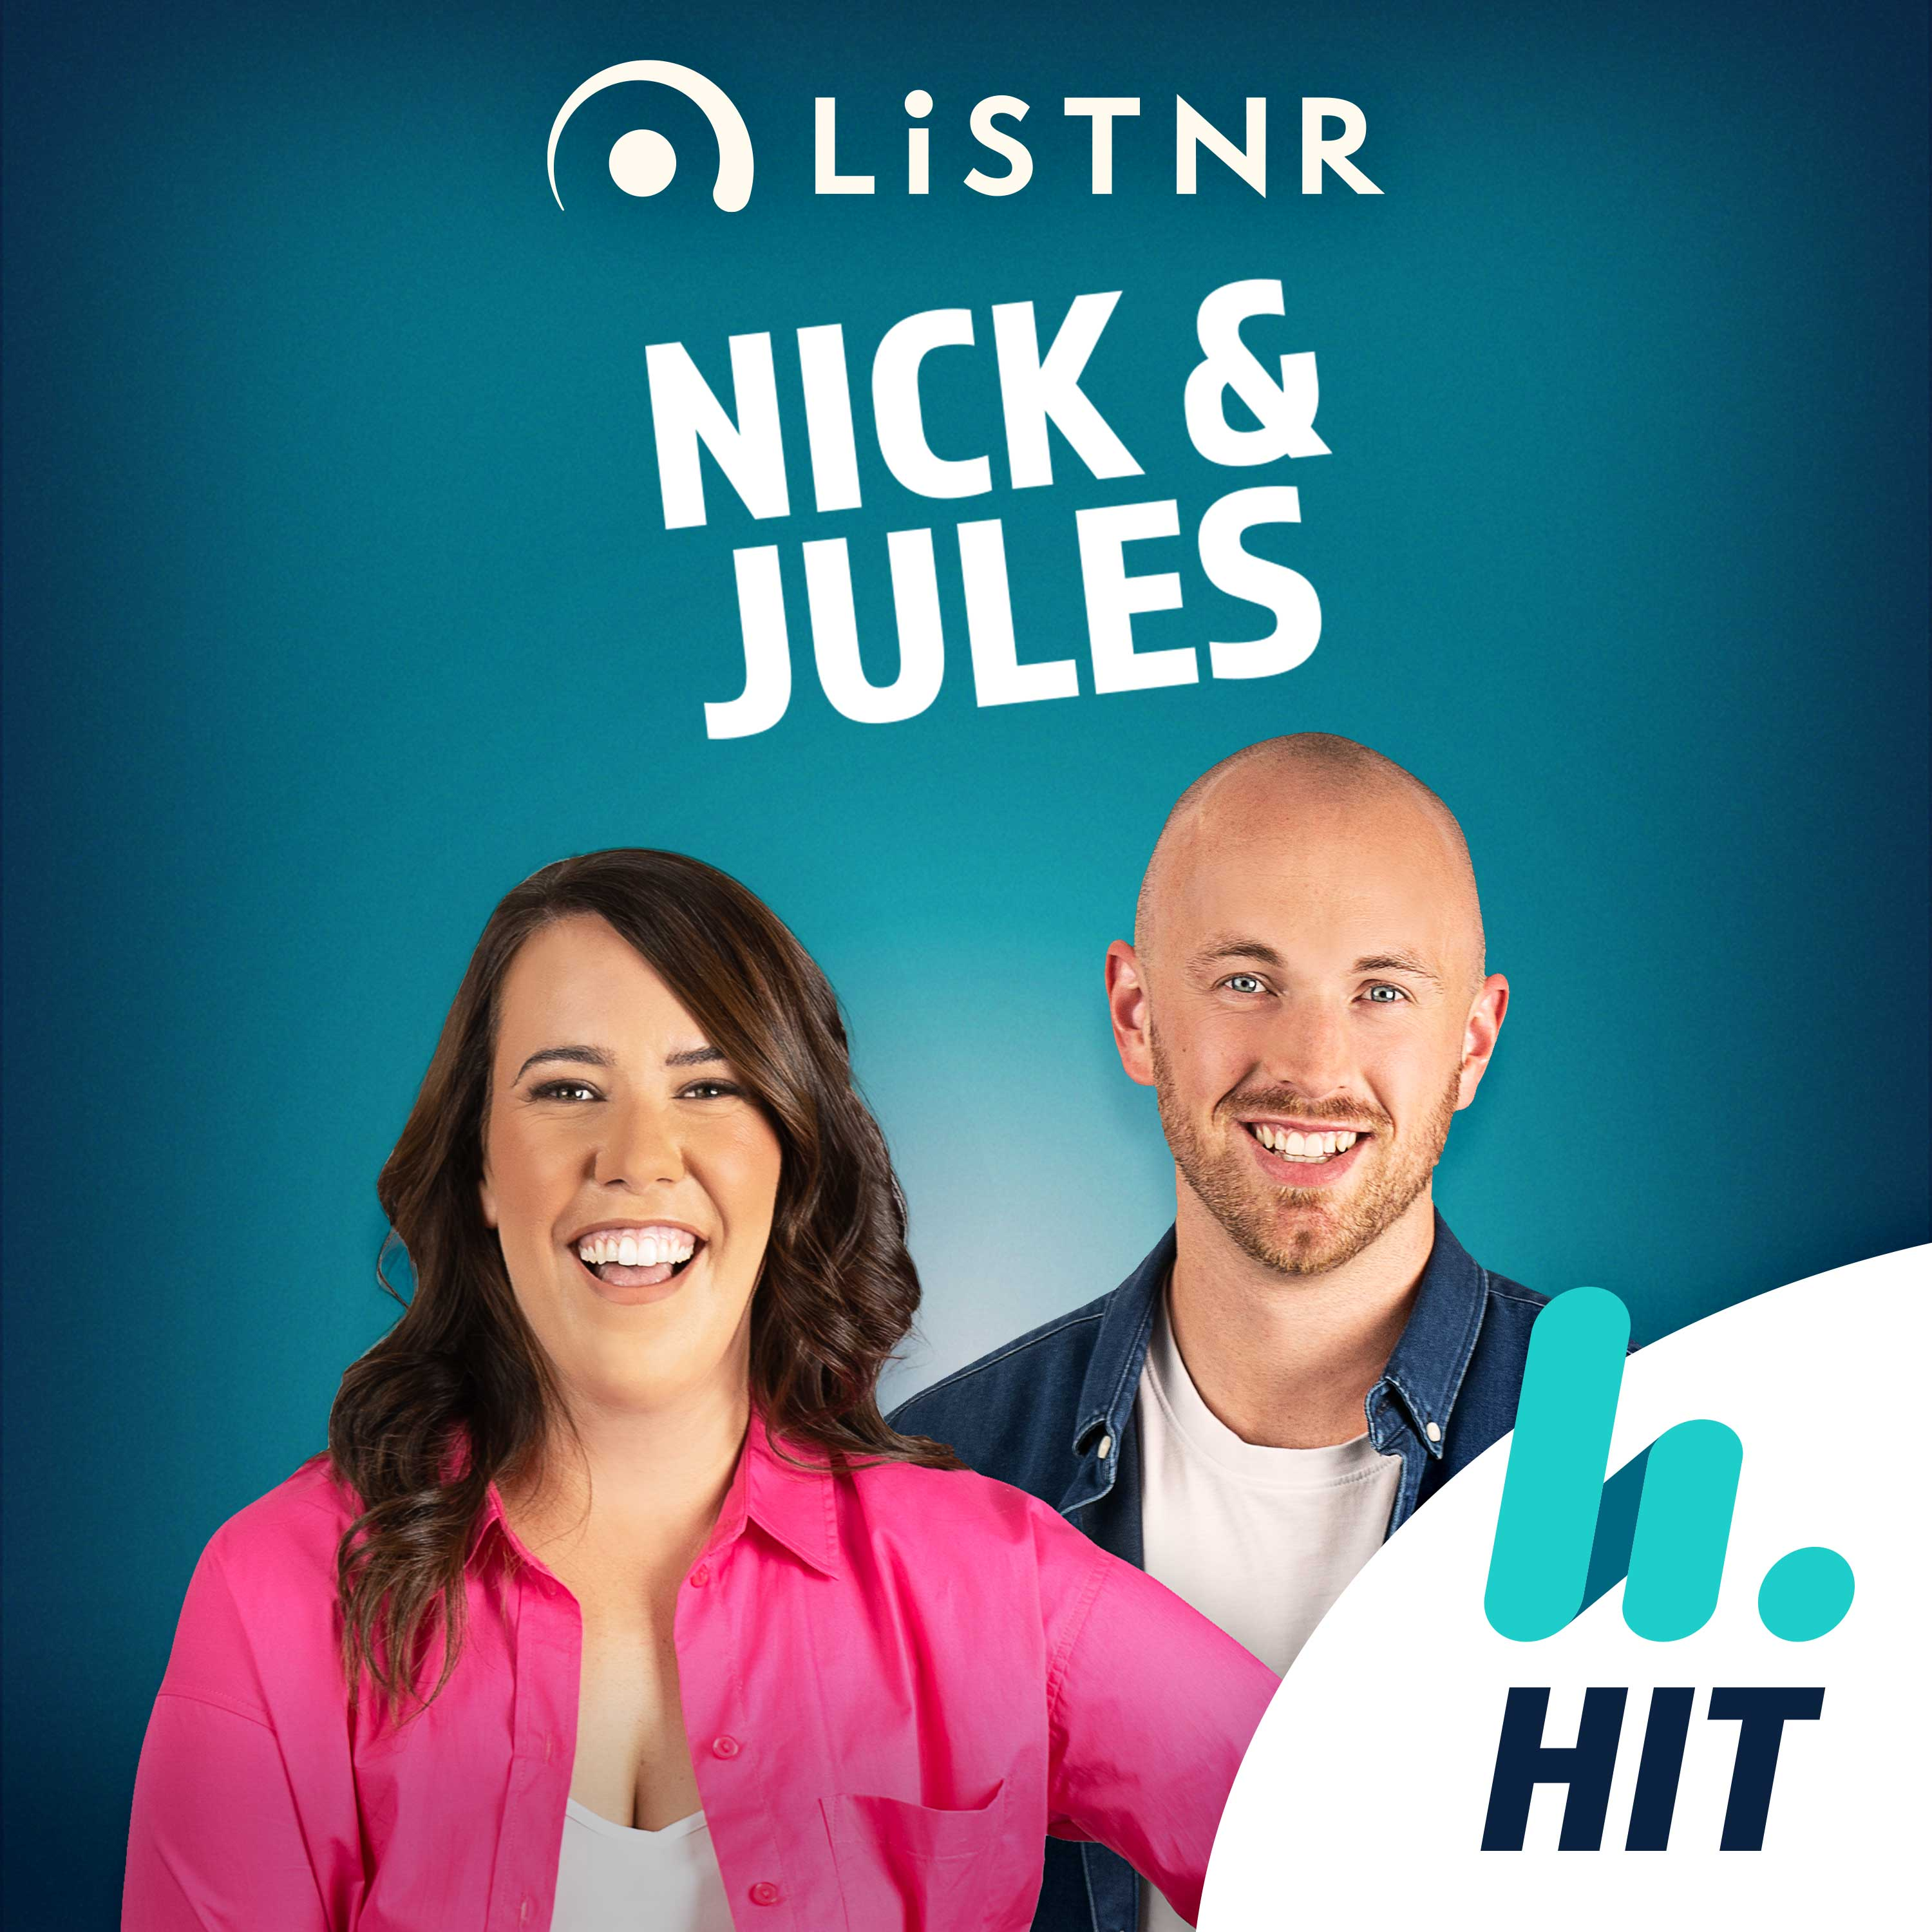 Off Air with Nick & Jules: Car Snoozes and Broken Phones